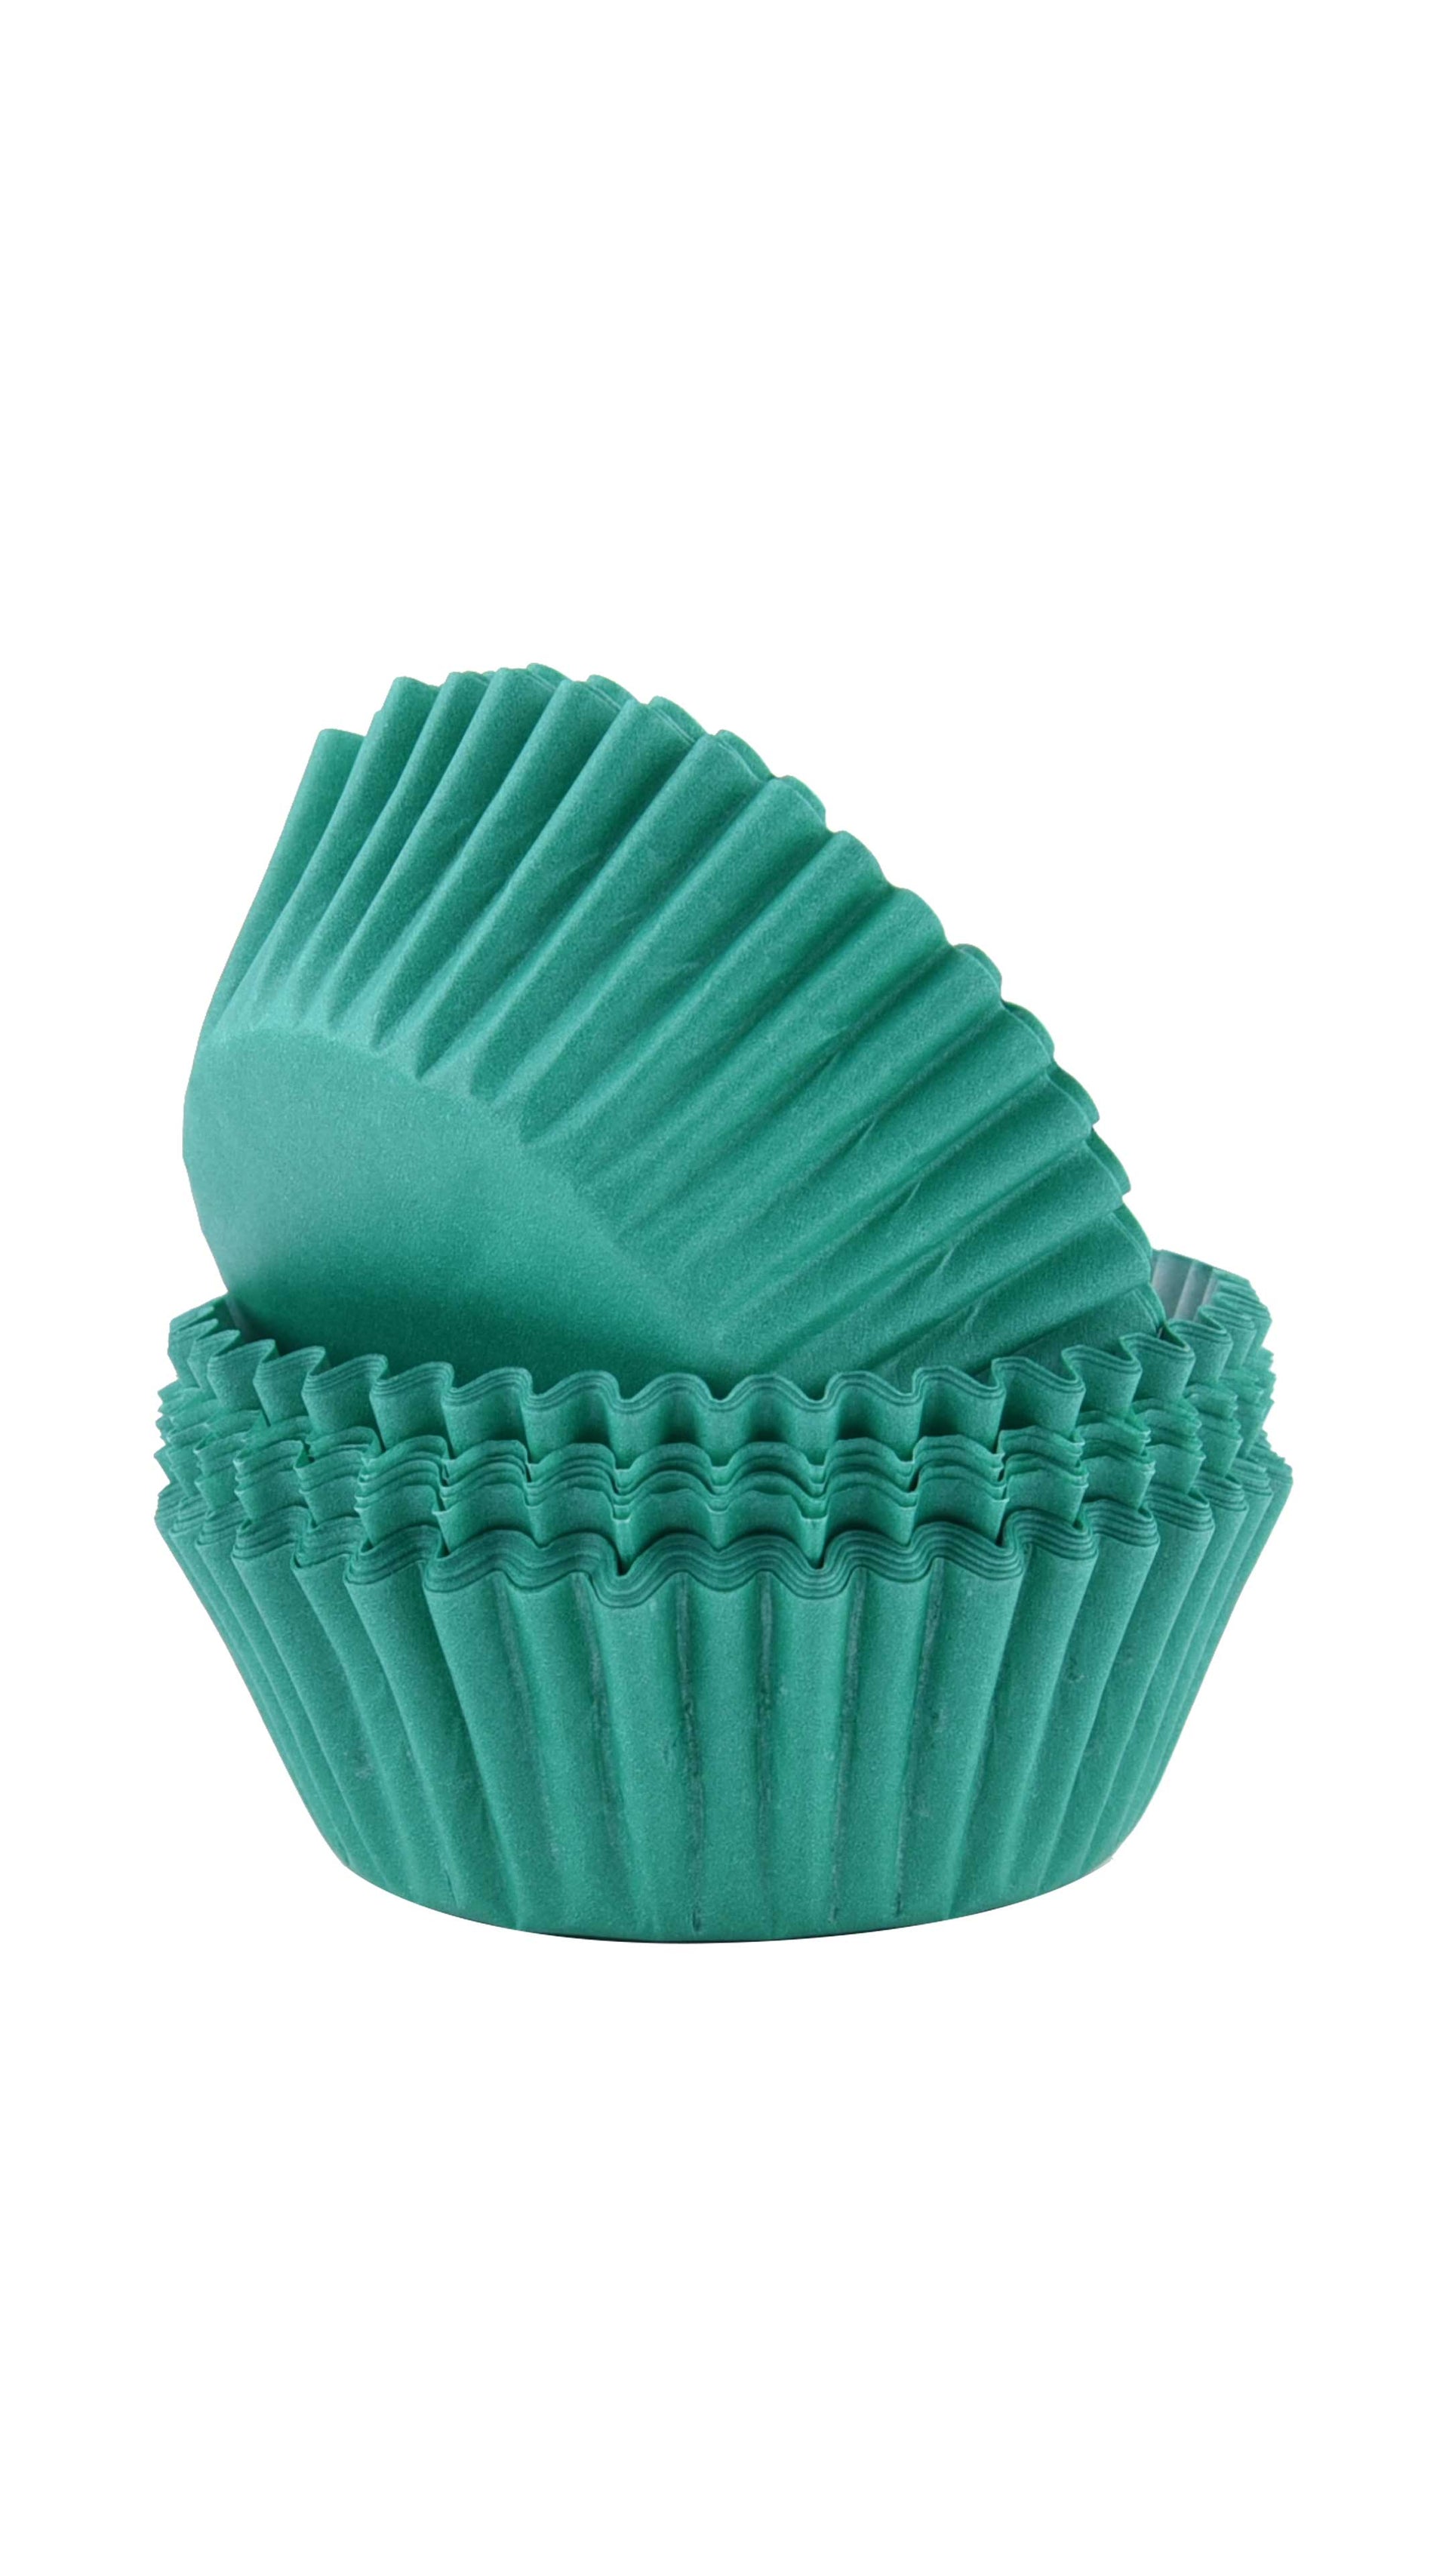 PME - Cupcake Cases - Green - 60 Pack Cupcake Cases PME